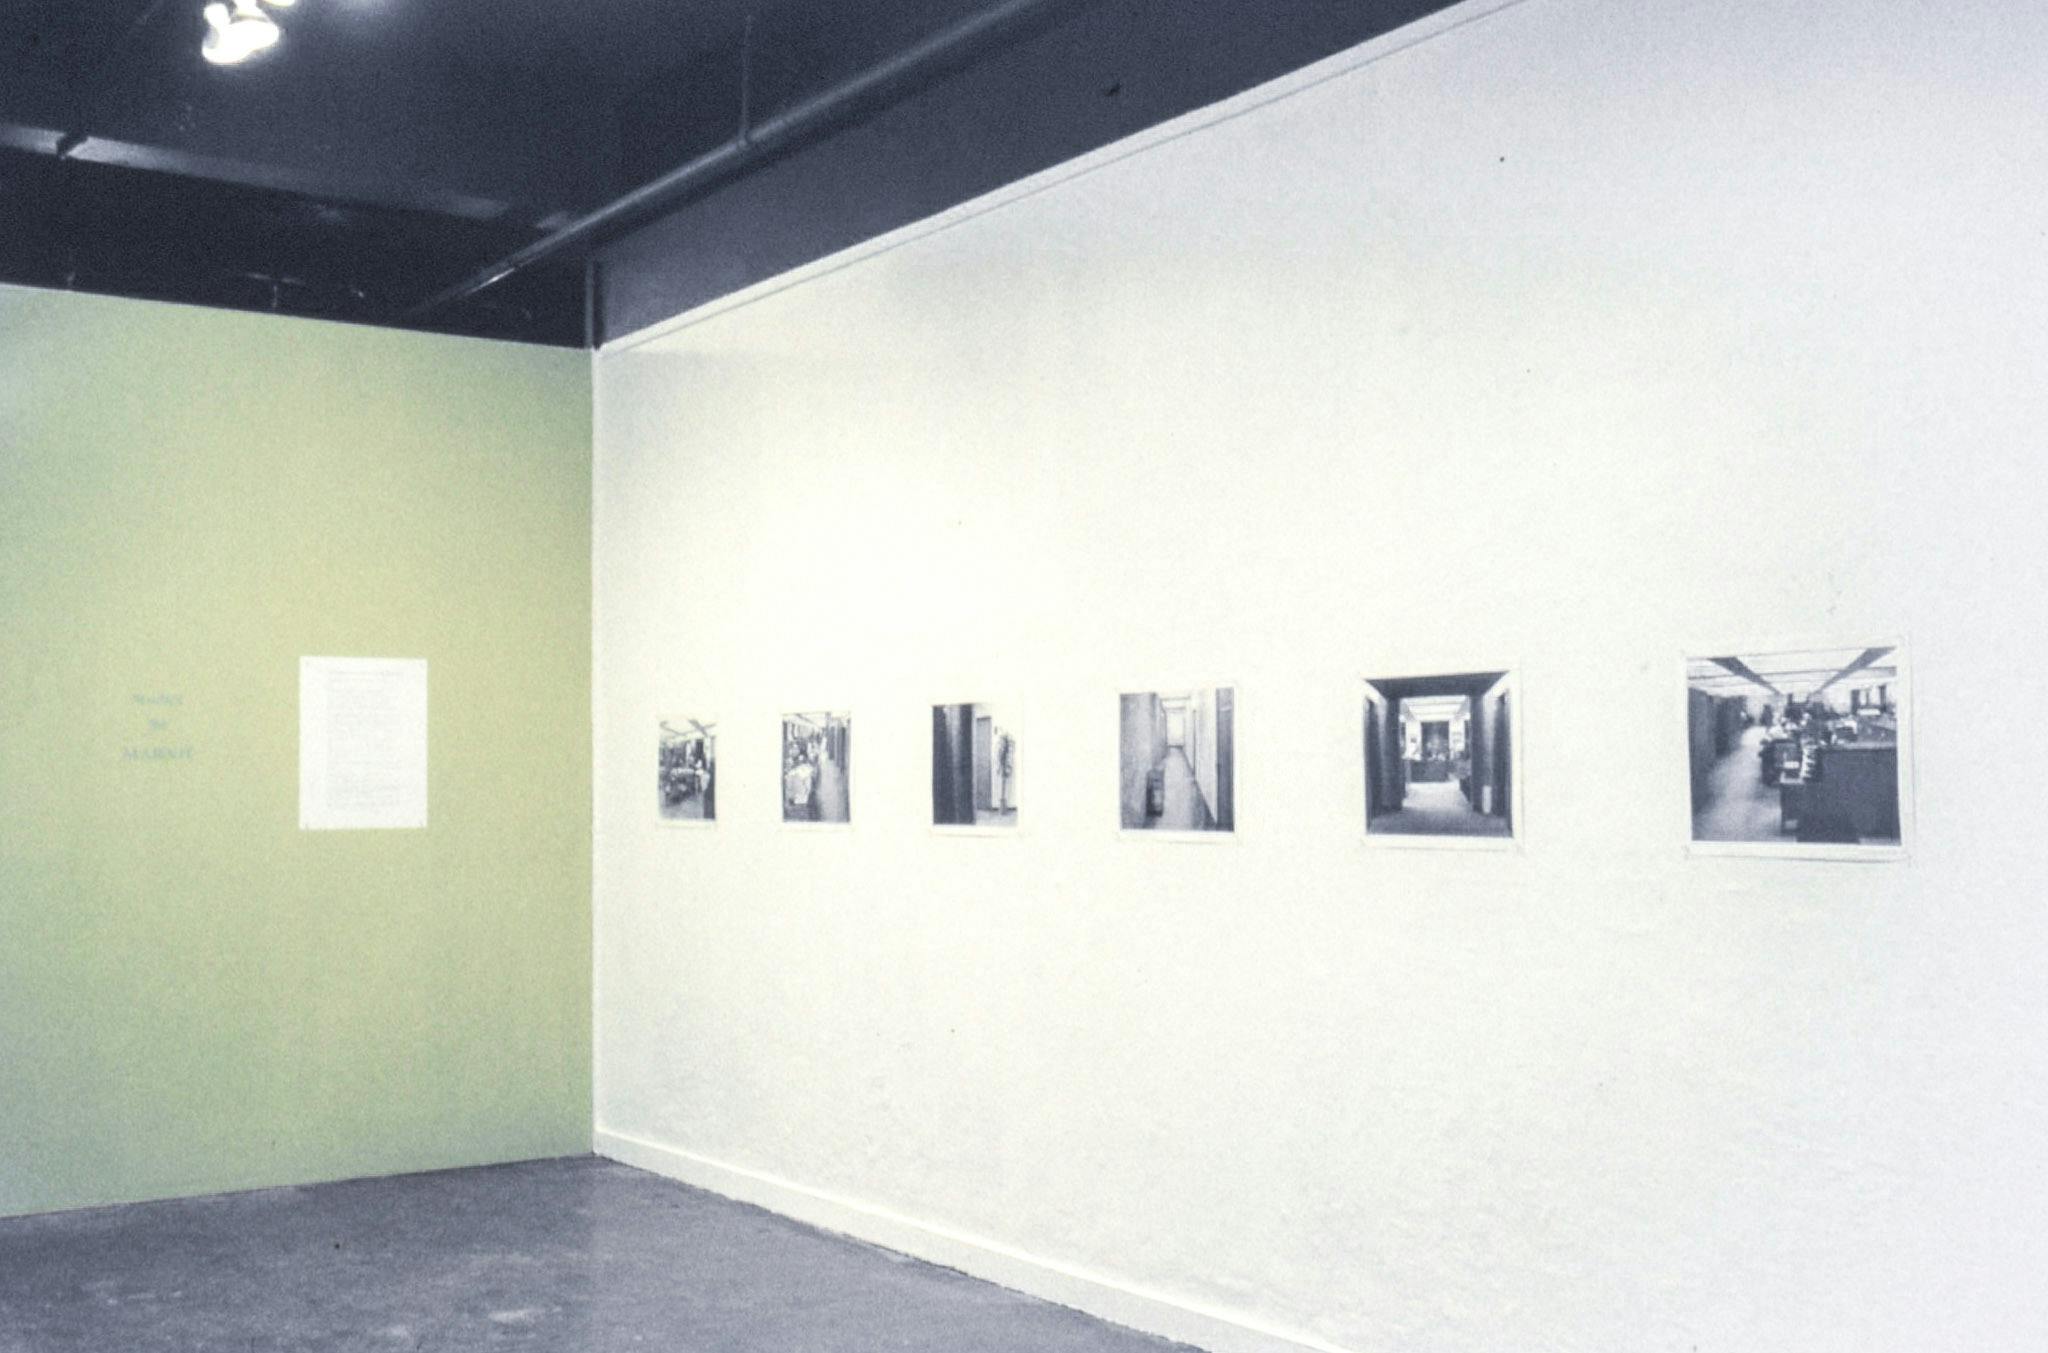 The corner of a gallery. One wall is white and shows 6 black and white images of architectural spaces, referencing the Hitchcock film, Marnie. The other wall is pale green and shows a sheet of text.